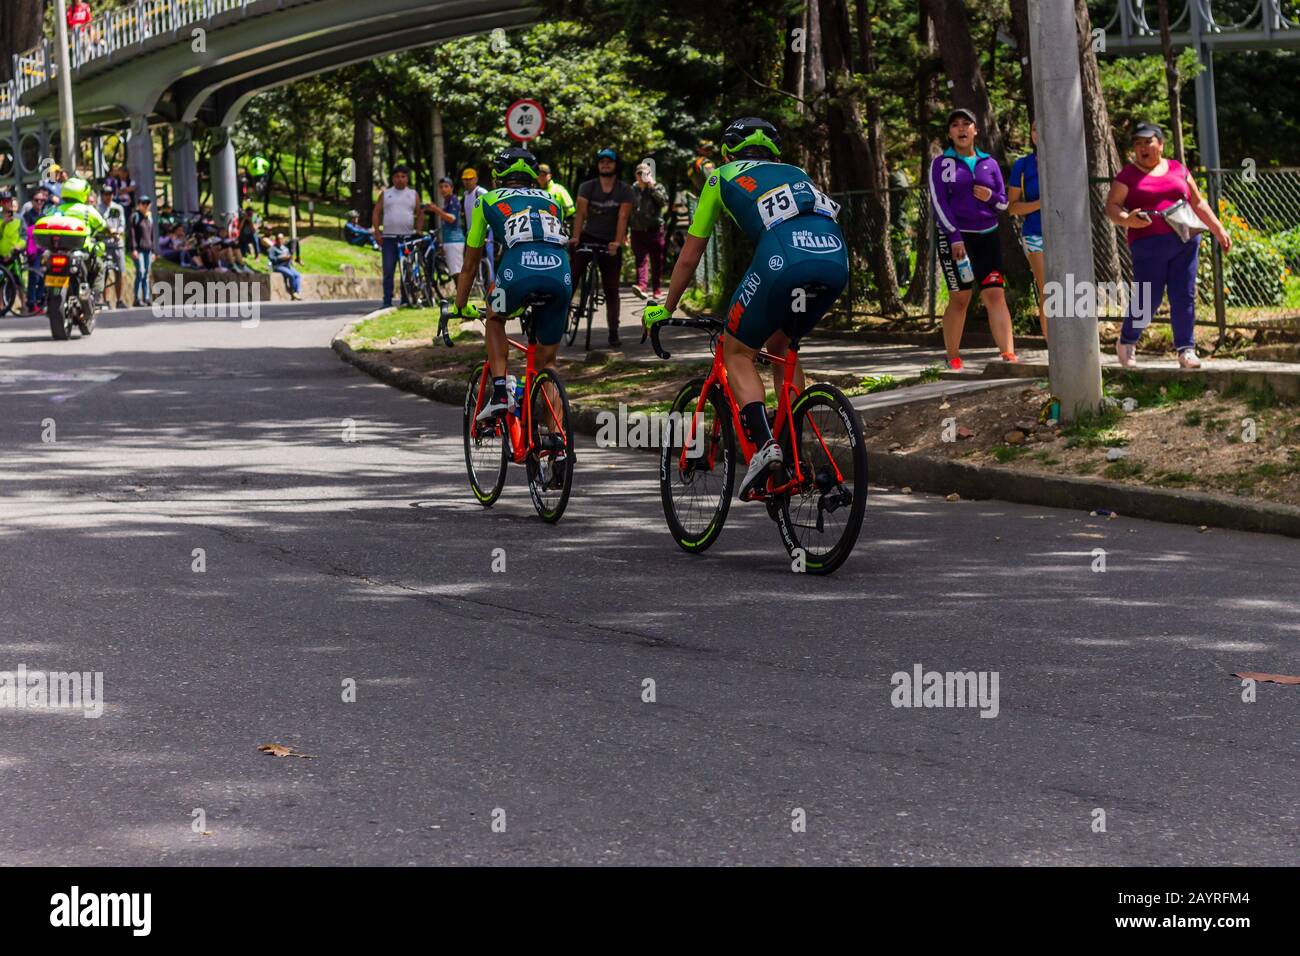 Page 3 Cycle Fans High Resolution Stock Photography And Images Alamy